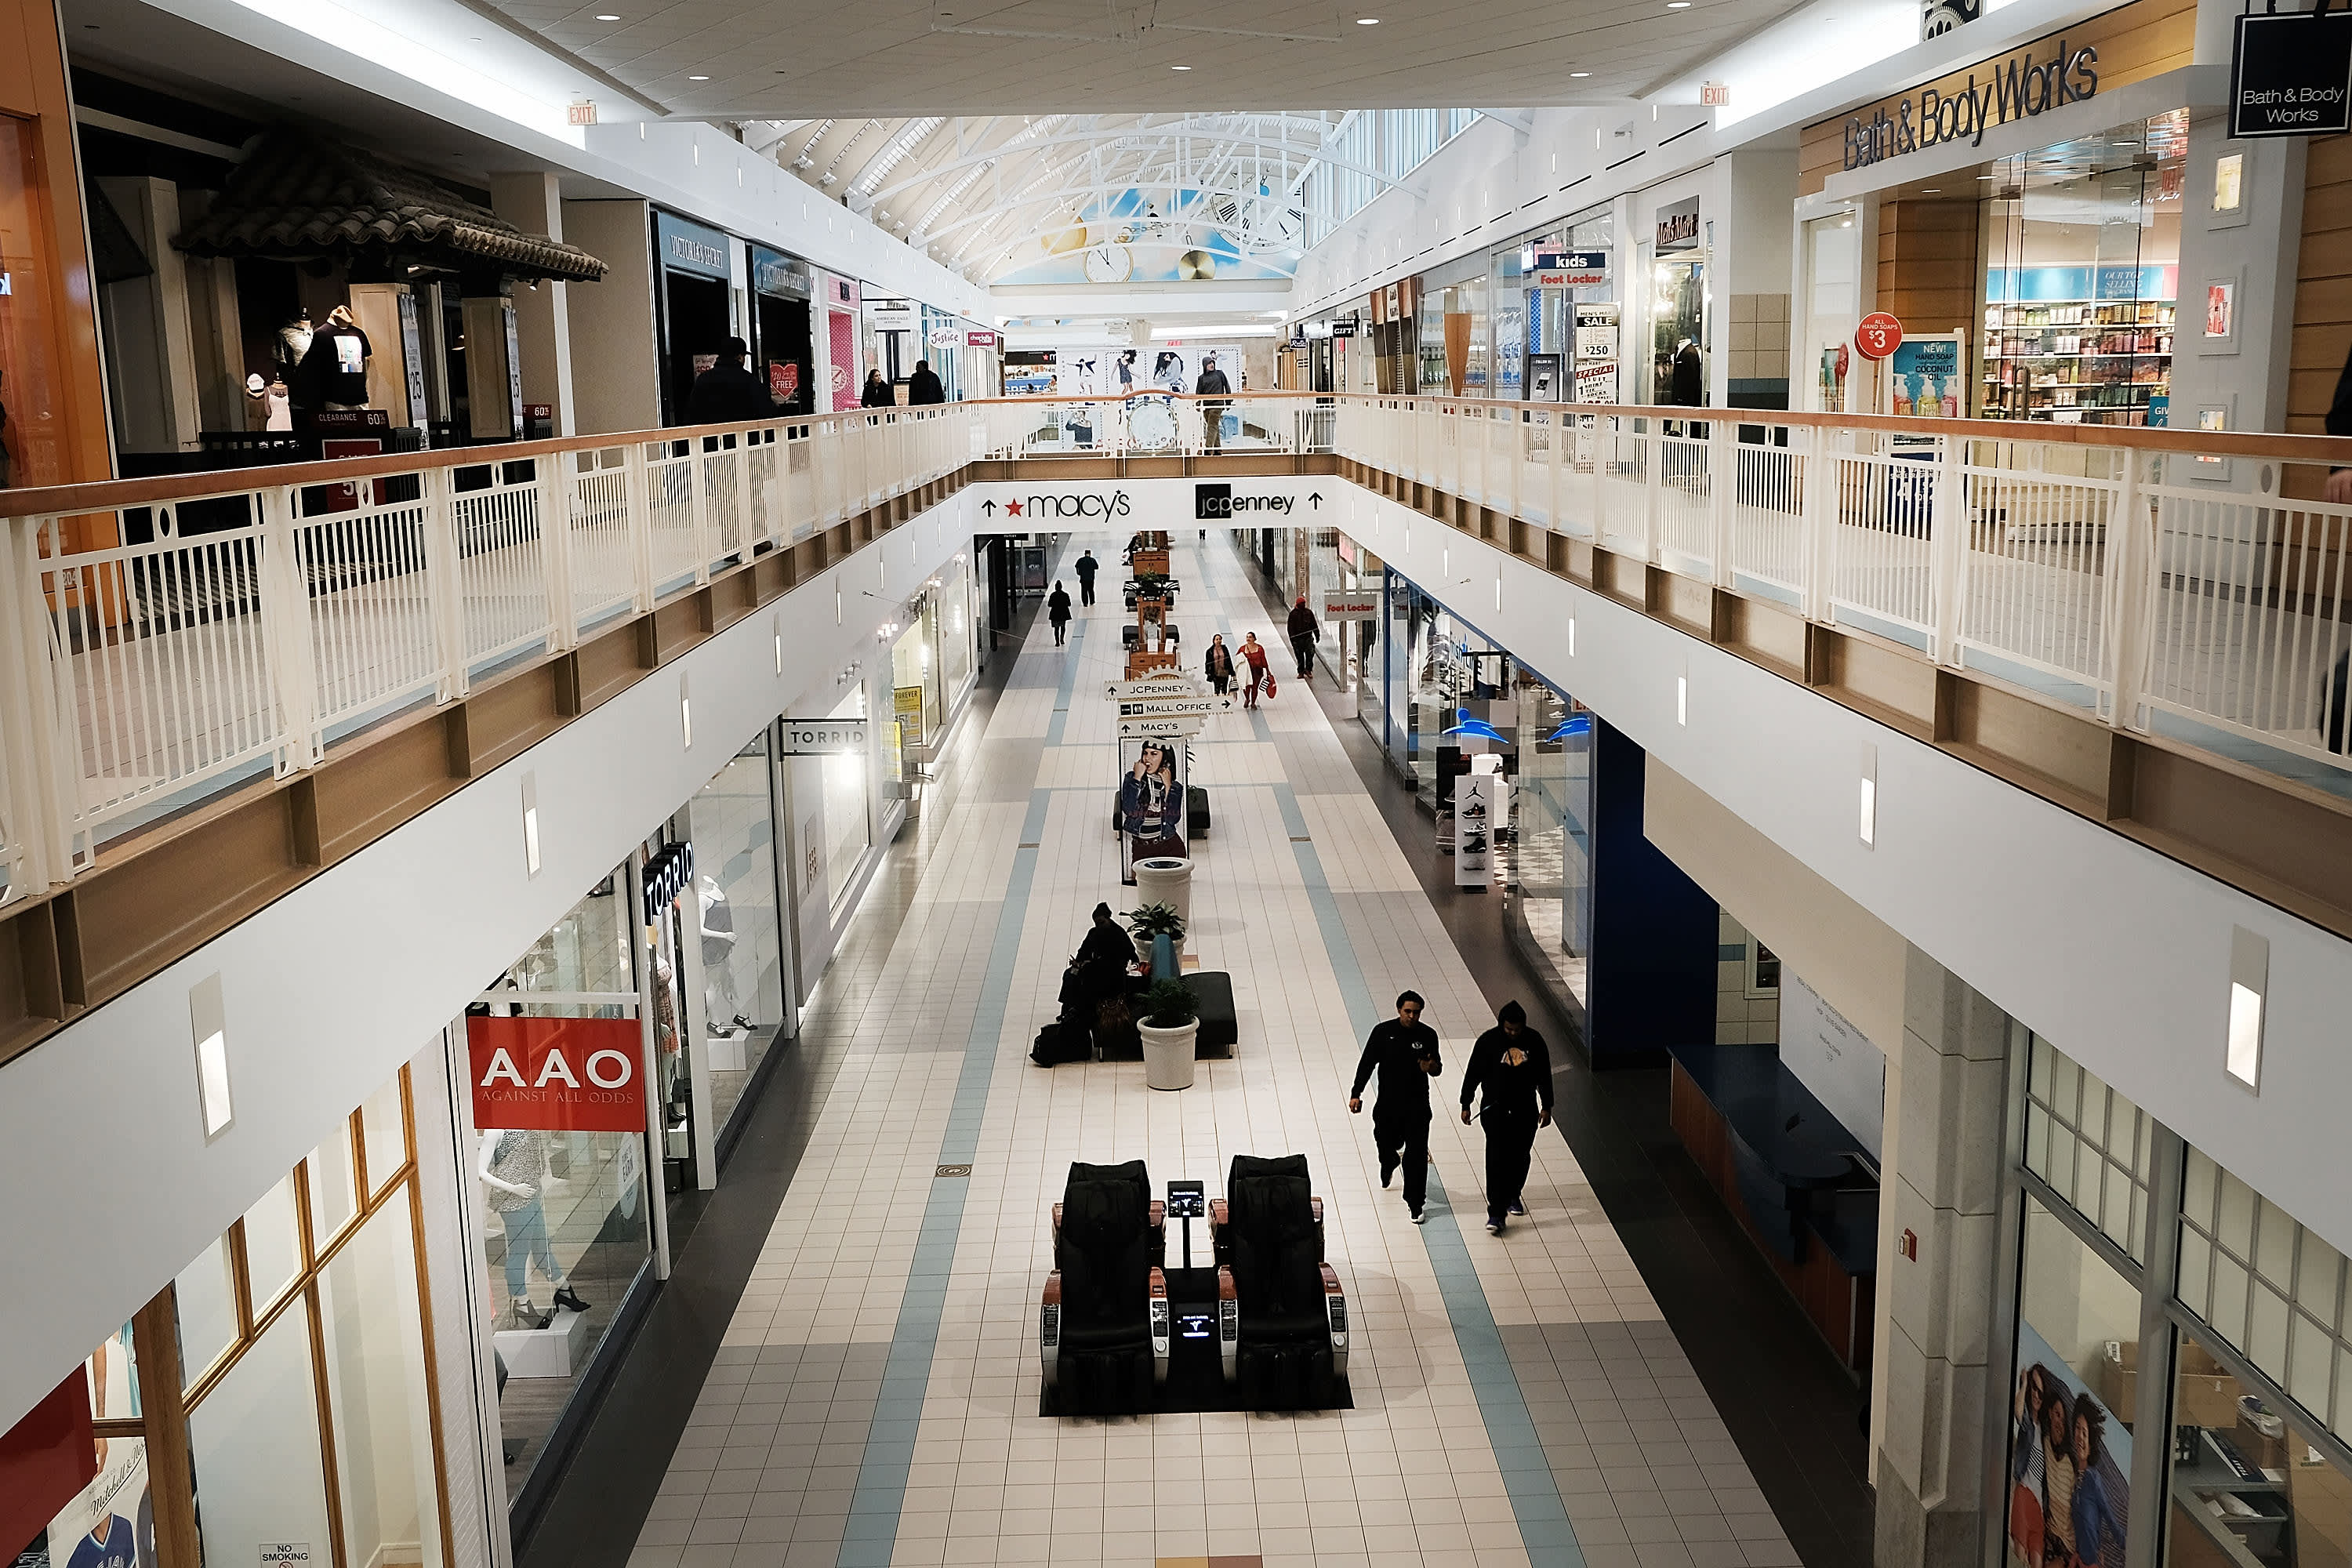 The call of the shopping mall